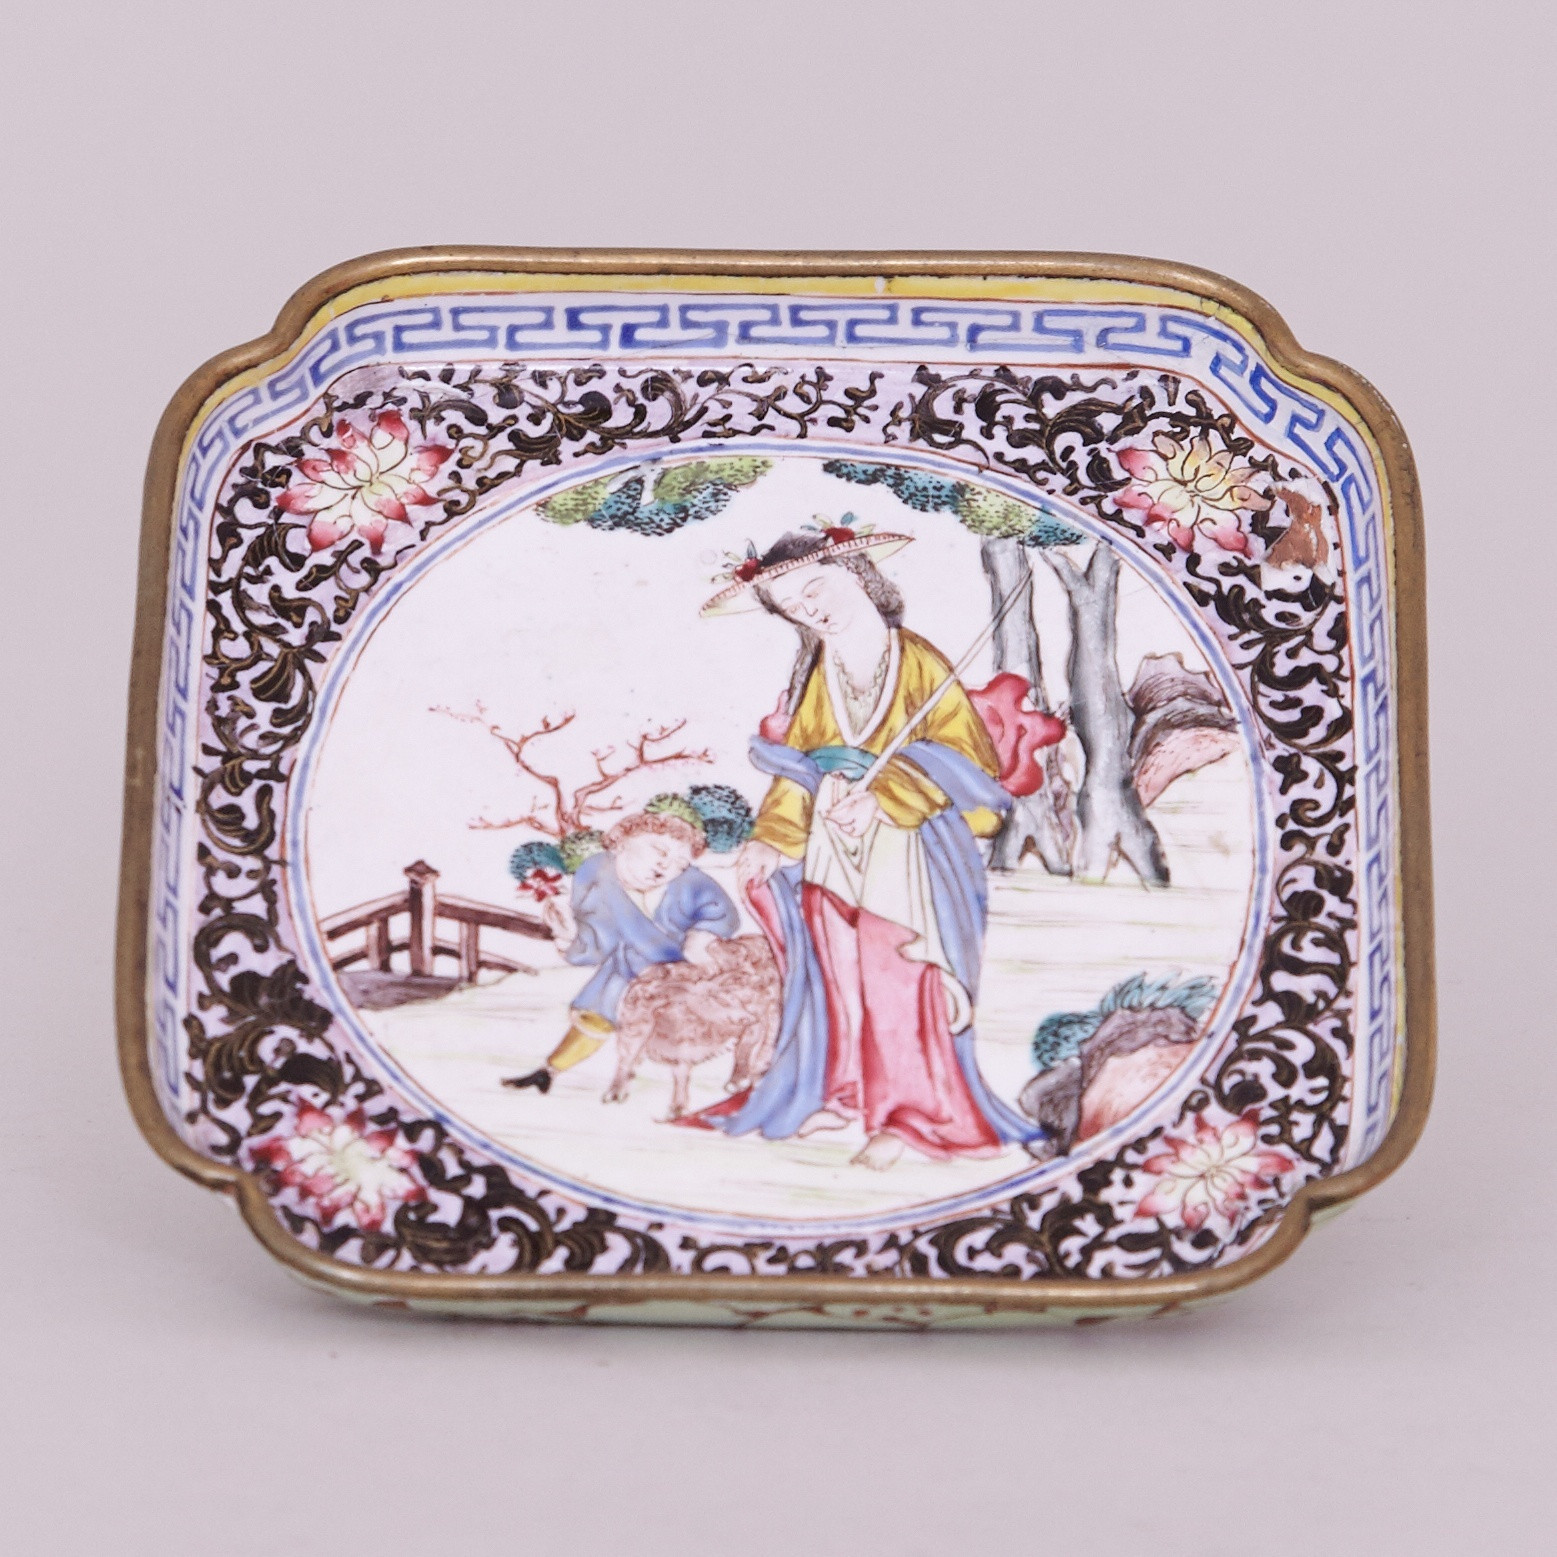 17 Lovable Chinese Cloisonne Vase Marks 2024 free download chinese cloisonne vase marks of a canton canted square enamel tray qianlong 1736 1795 anita gray in a canton canted square enamel tray